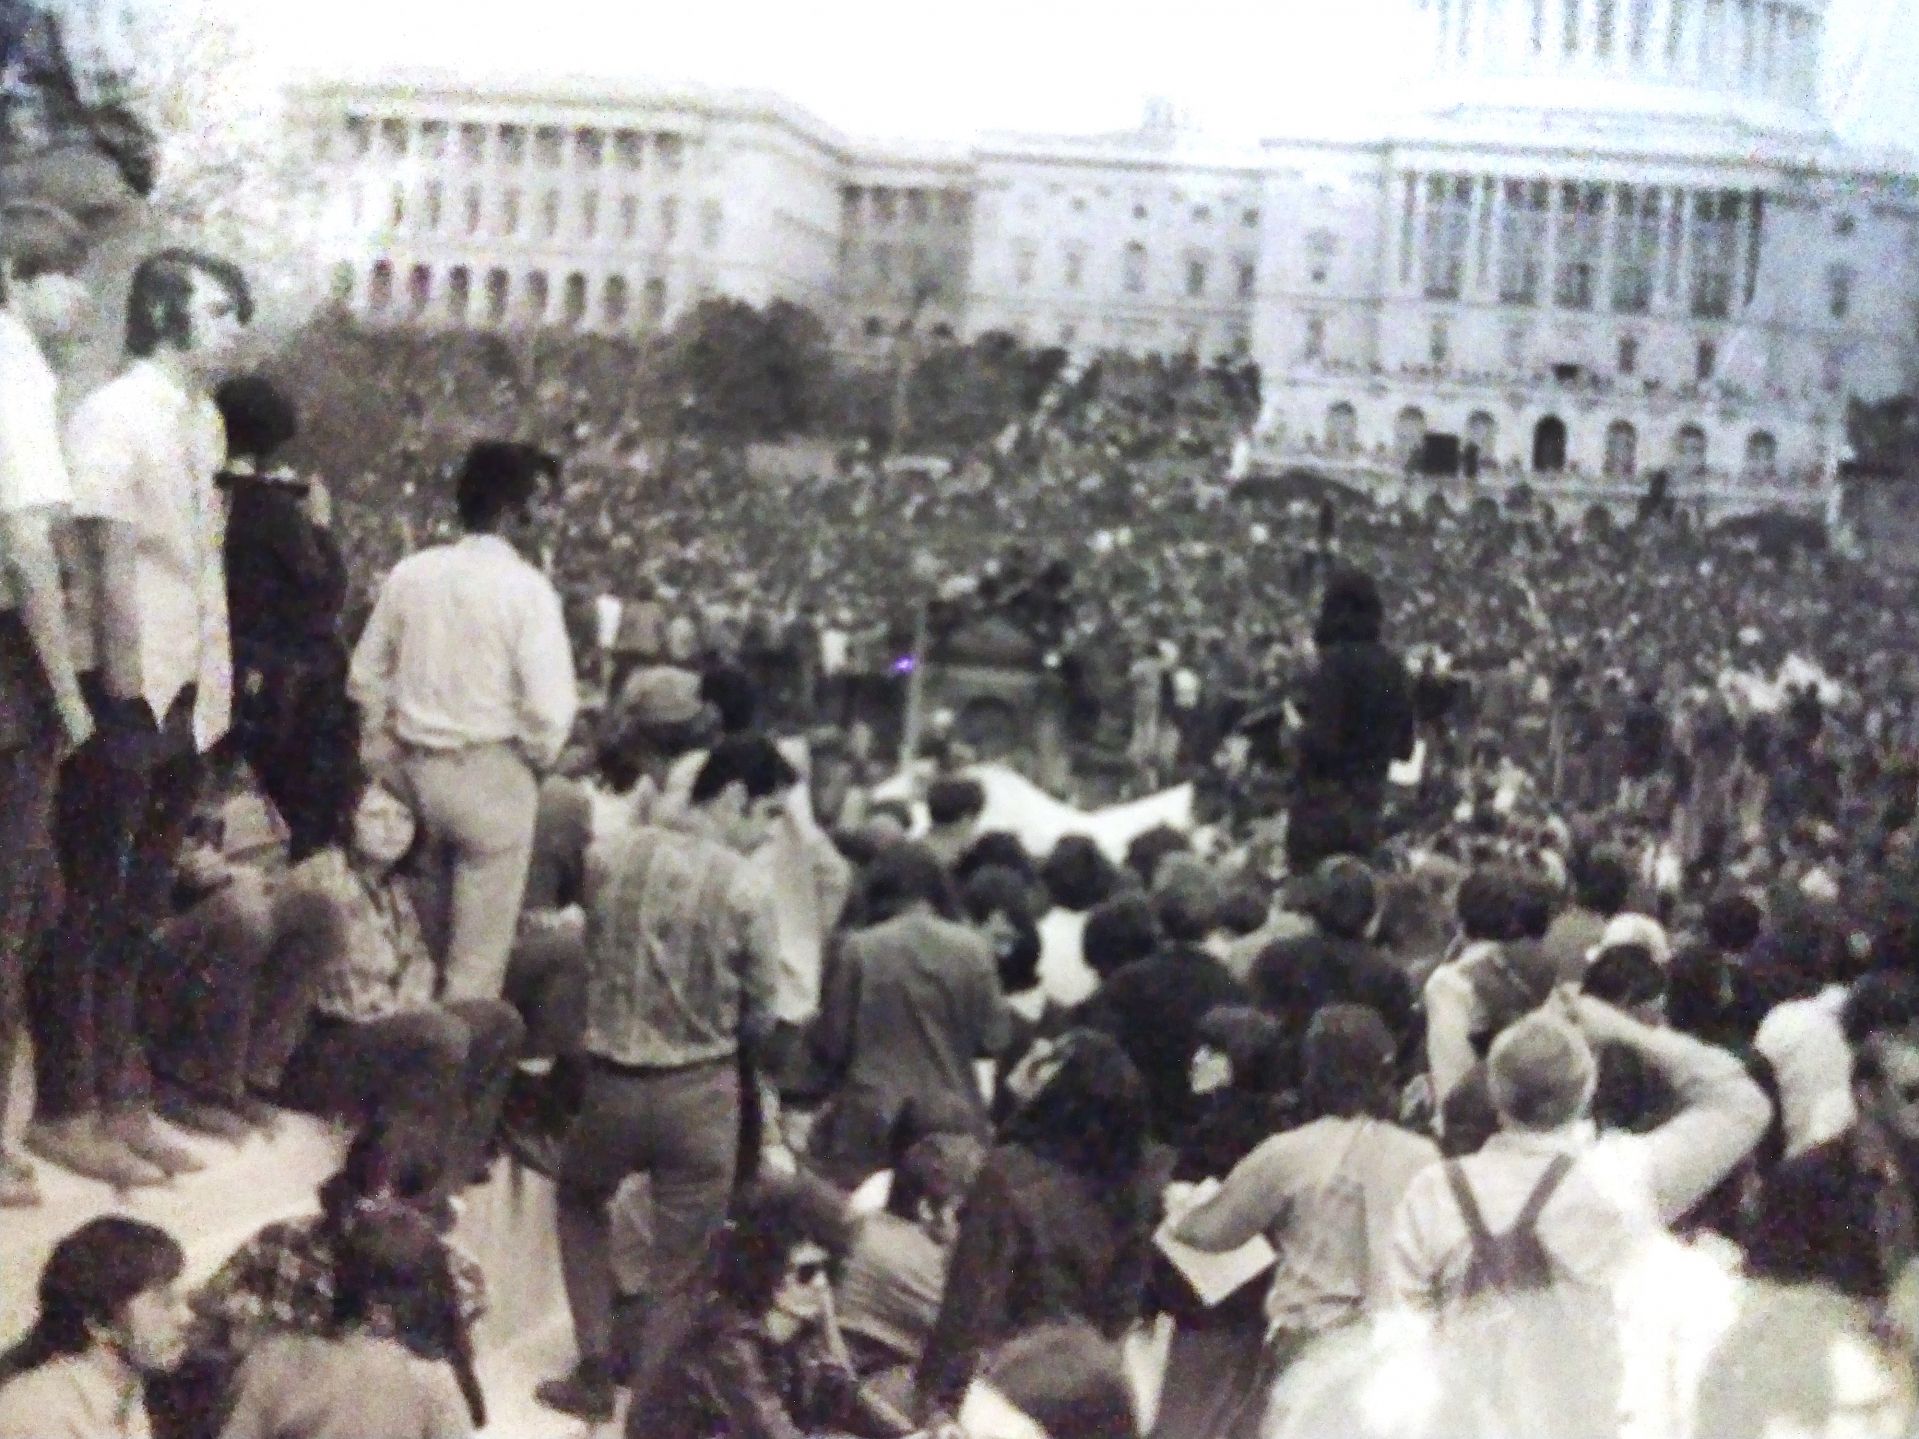 Mac Herrling took this photograph of protestors gathered on the National Mall during the historic April 1971 protest against the Vietnam War.